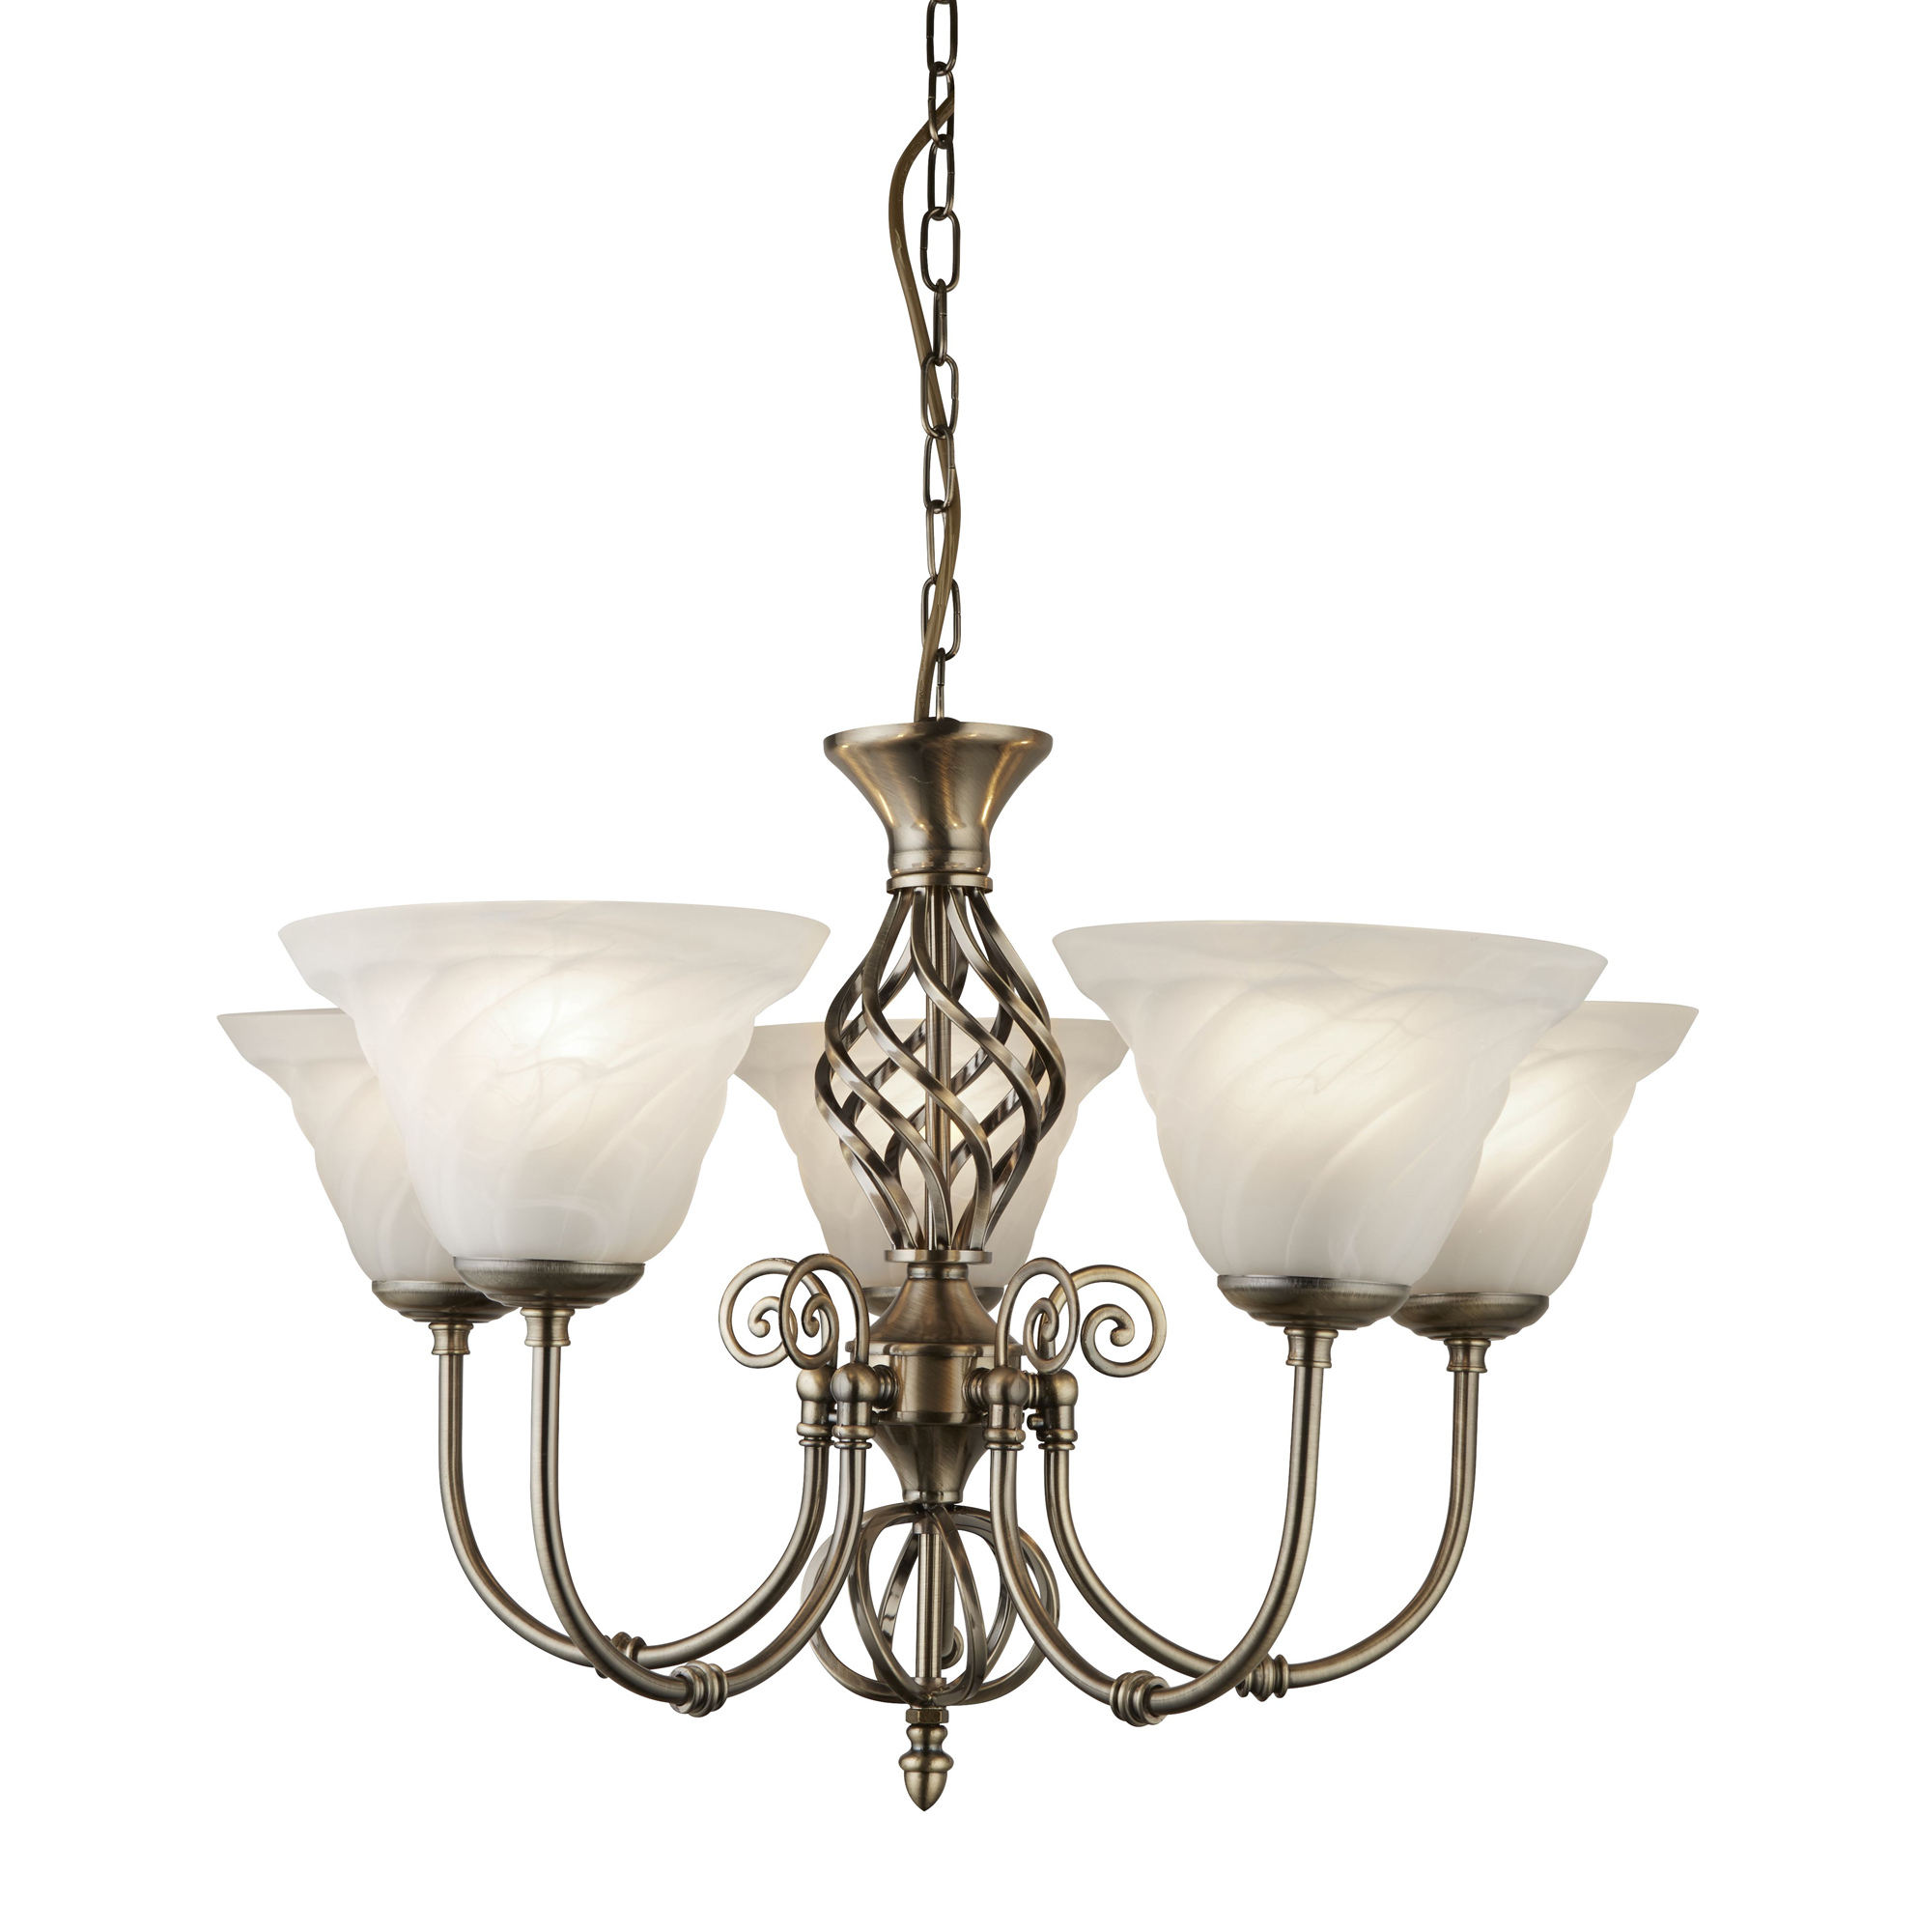 Cameroon 5Lt Ceiling Pendant - Antique Brass & Marble Glass